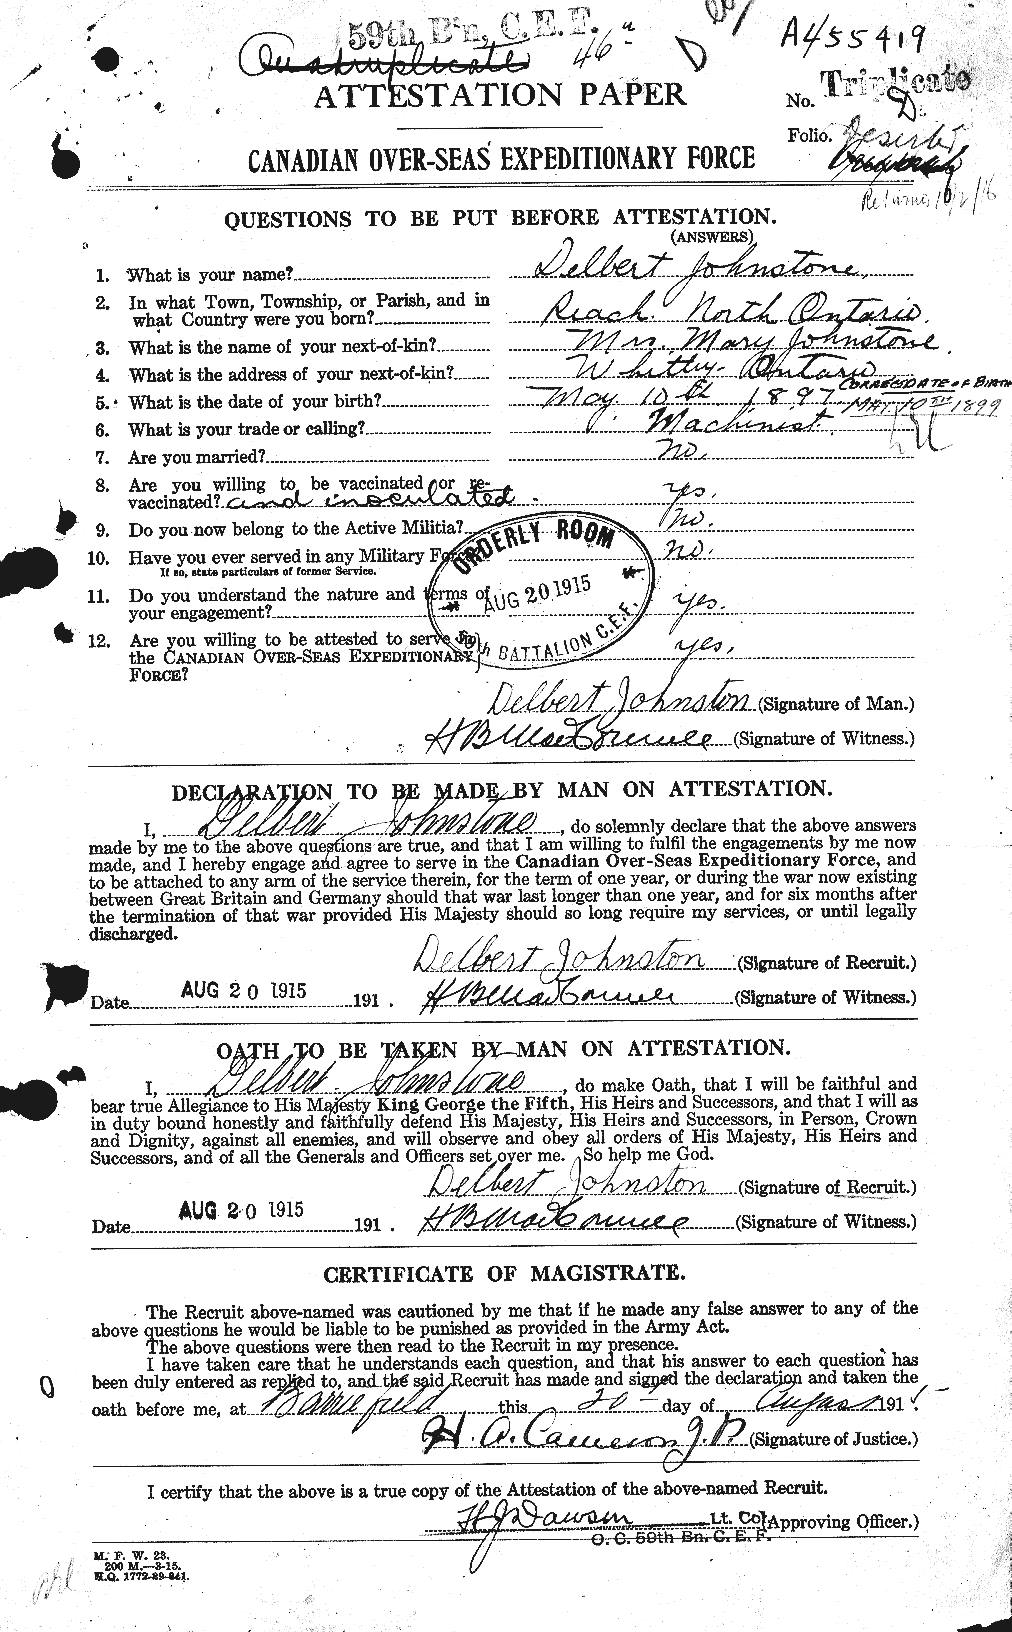 Personnel Records of the First World War - CEF 419578a